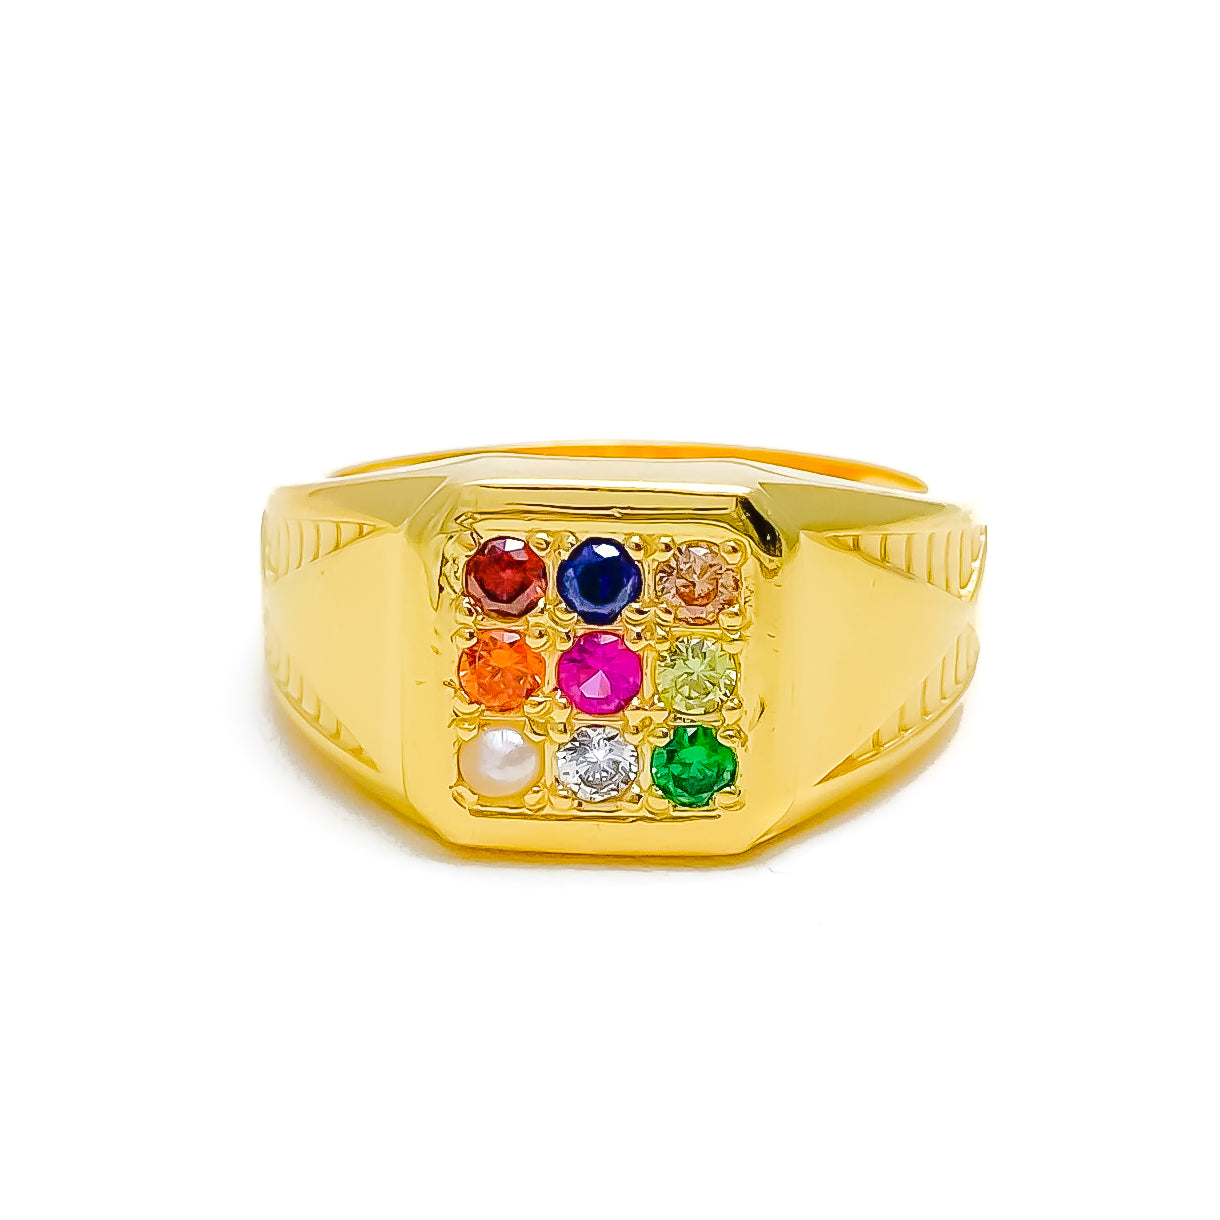 Buy Reiki Crystal Products Clear Crystal Stone Ring Tortoise Ring/Turtle  Astrological Ring Navratna Stone Ring (Color : Clear & Golden) at Amazon.in